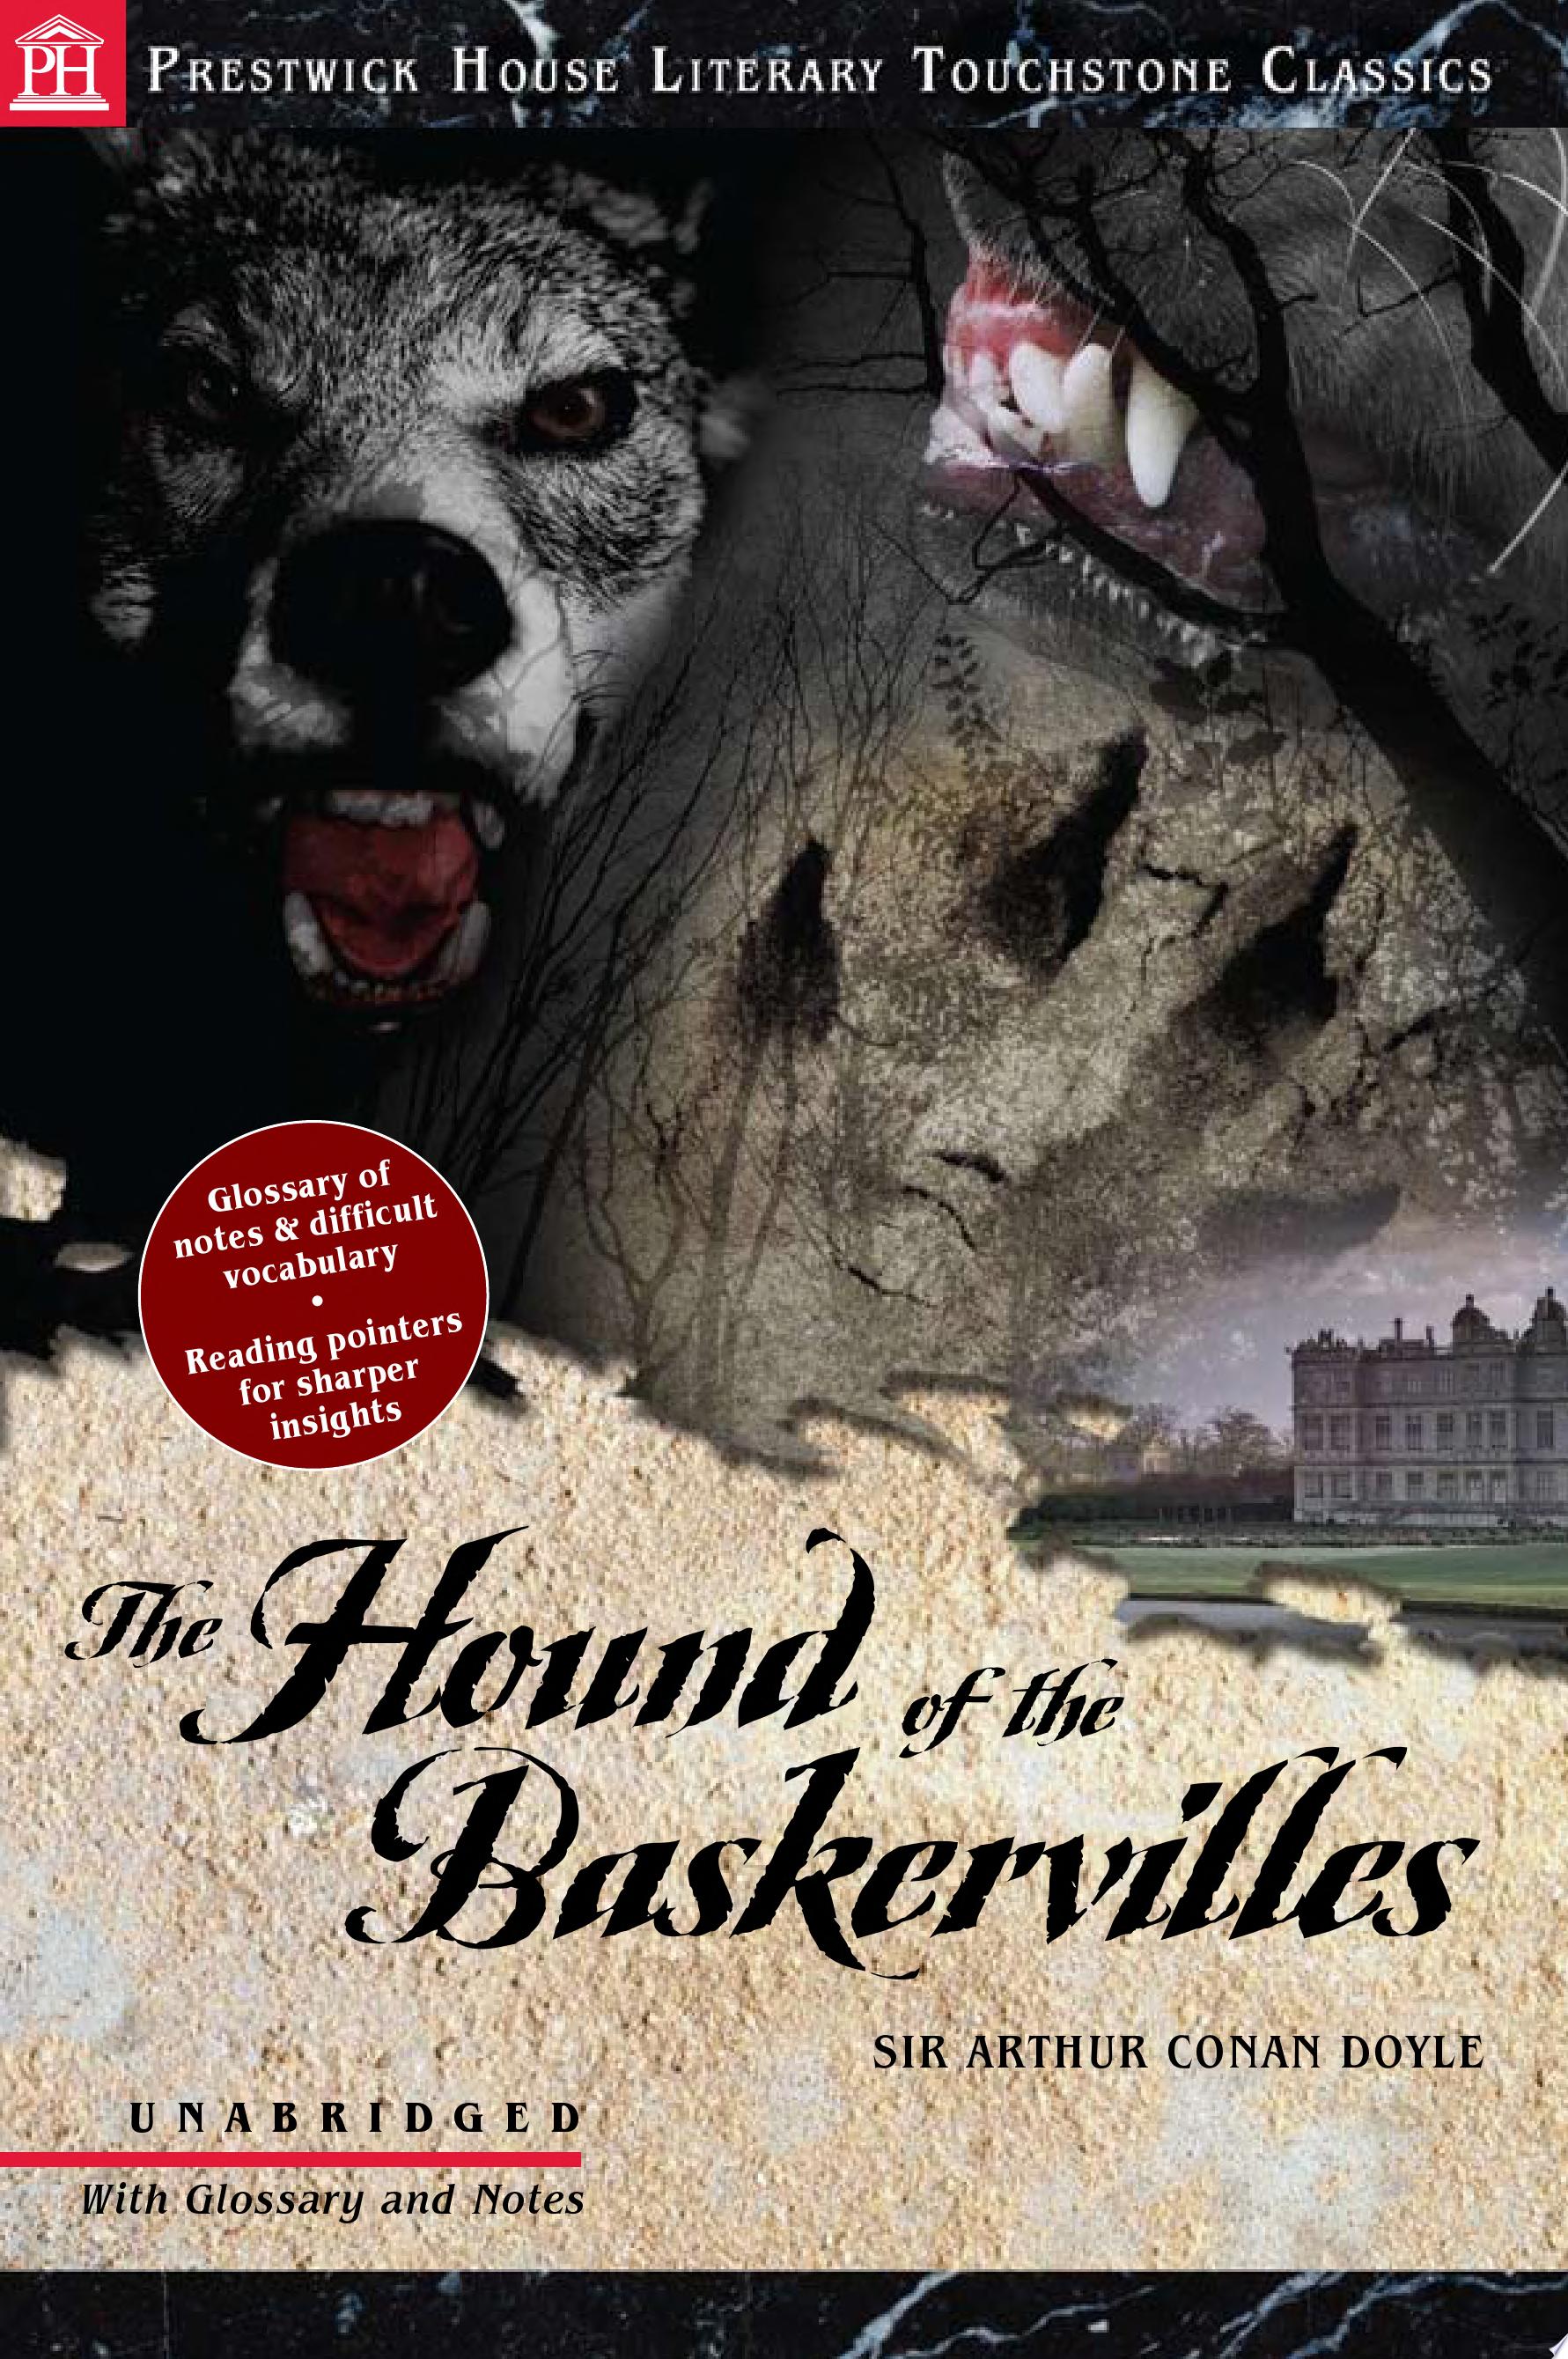 Image for "The Hound of the Baskervilles"